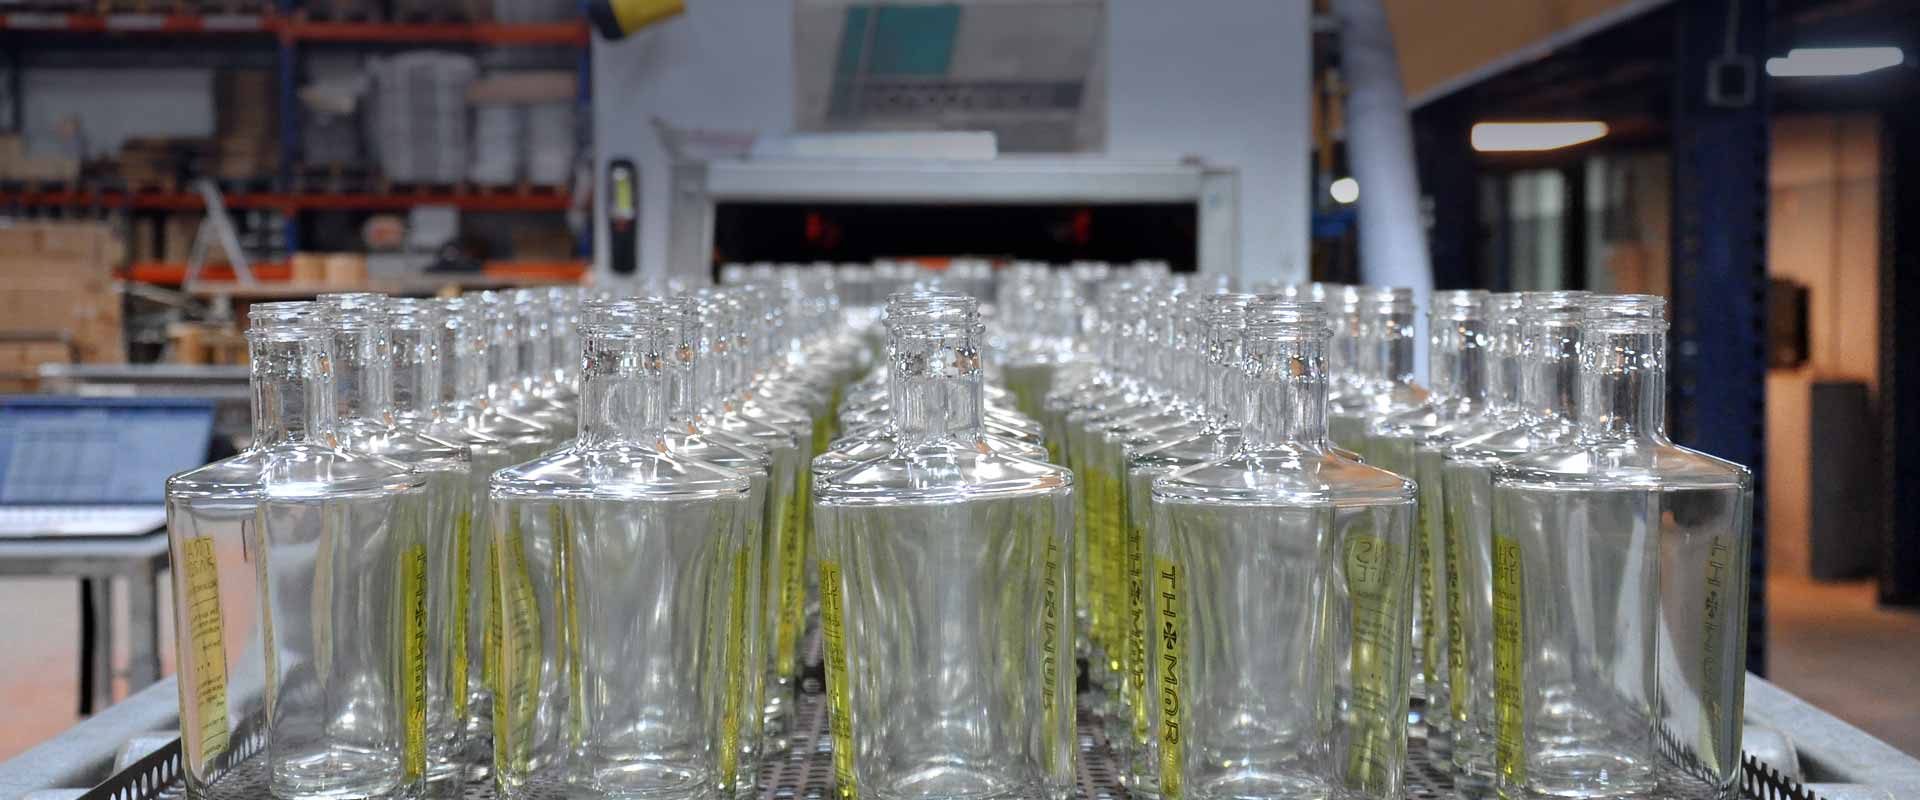 decorated glass bottles factory - banner